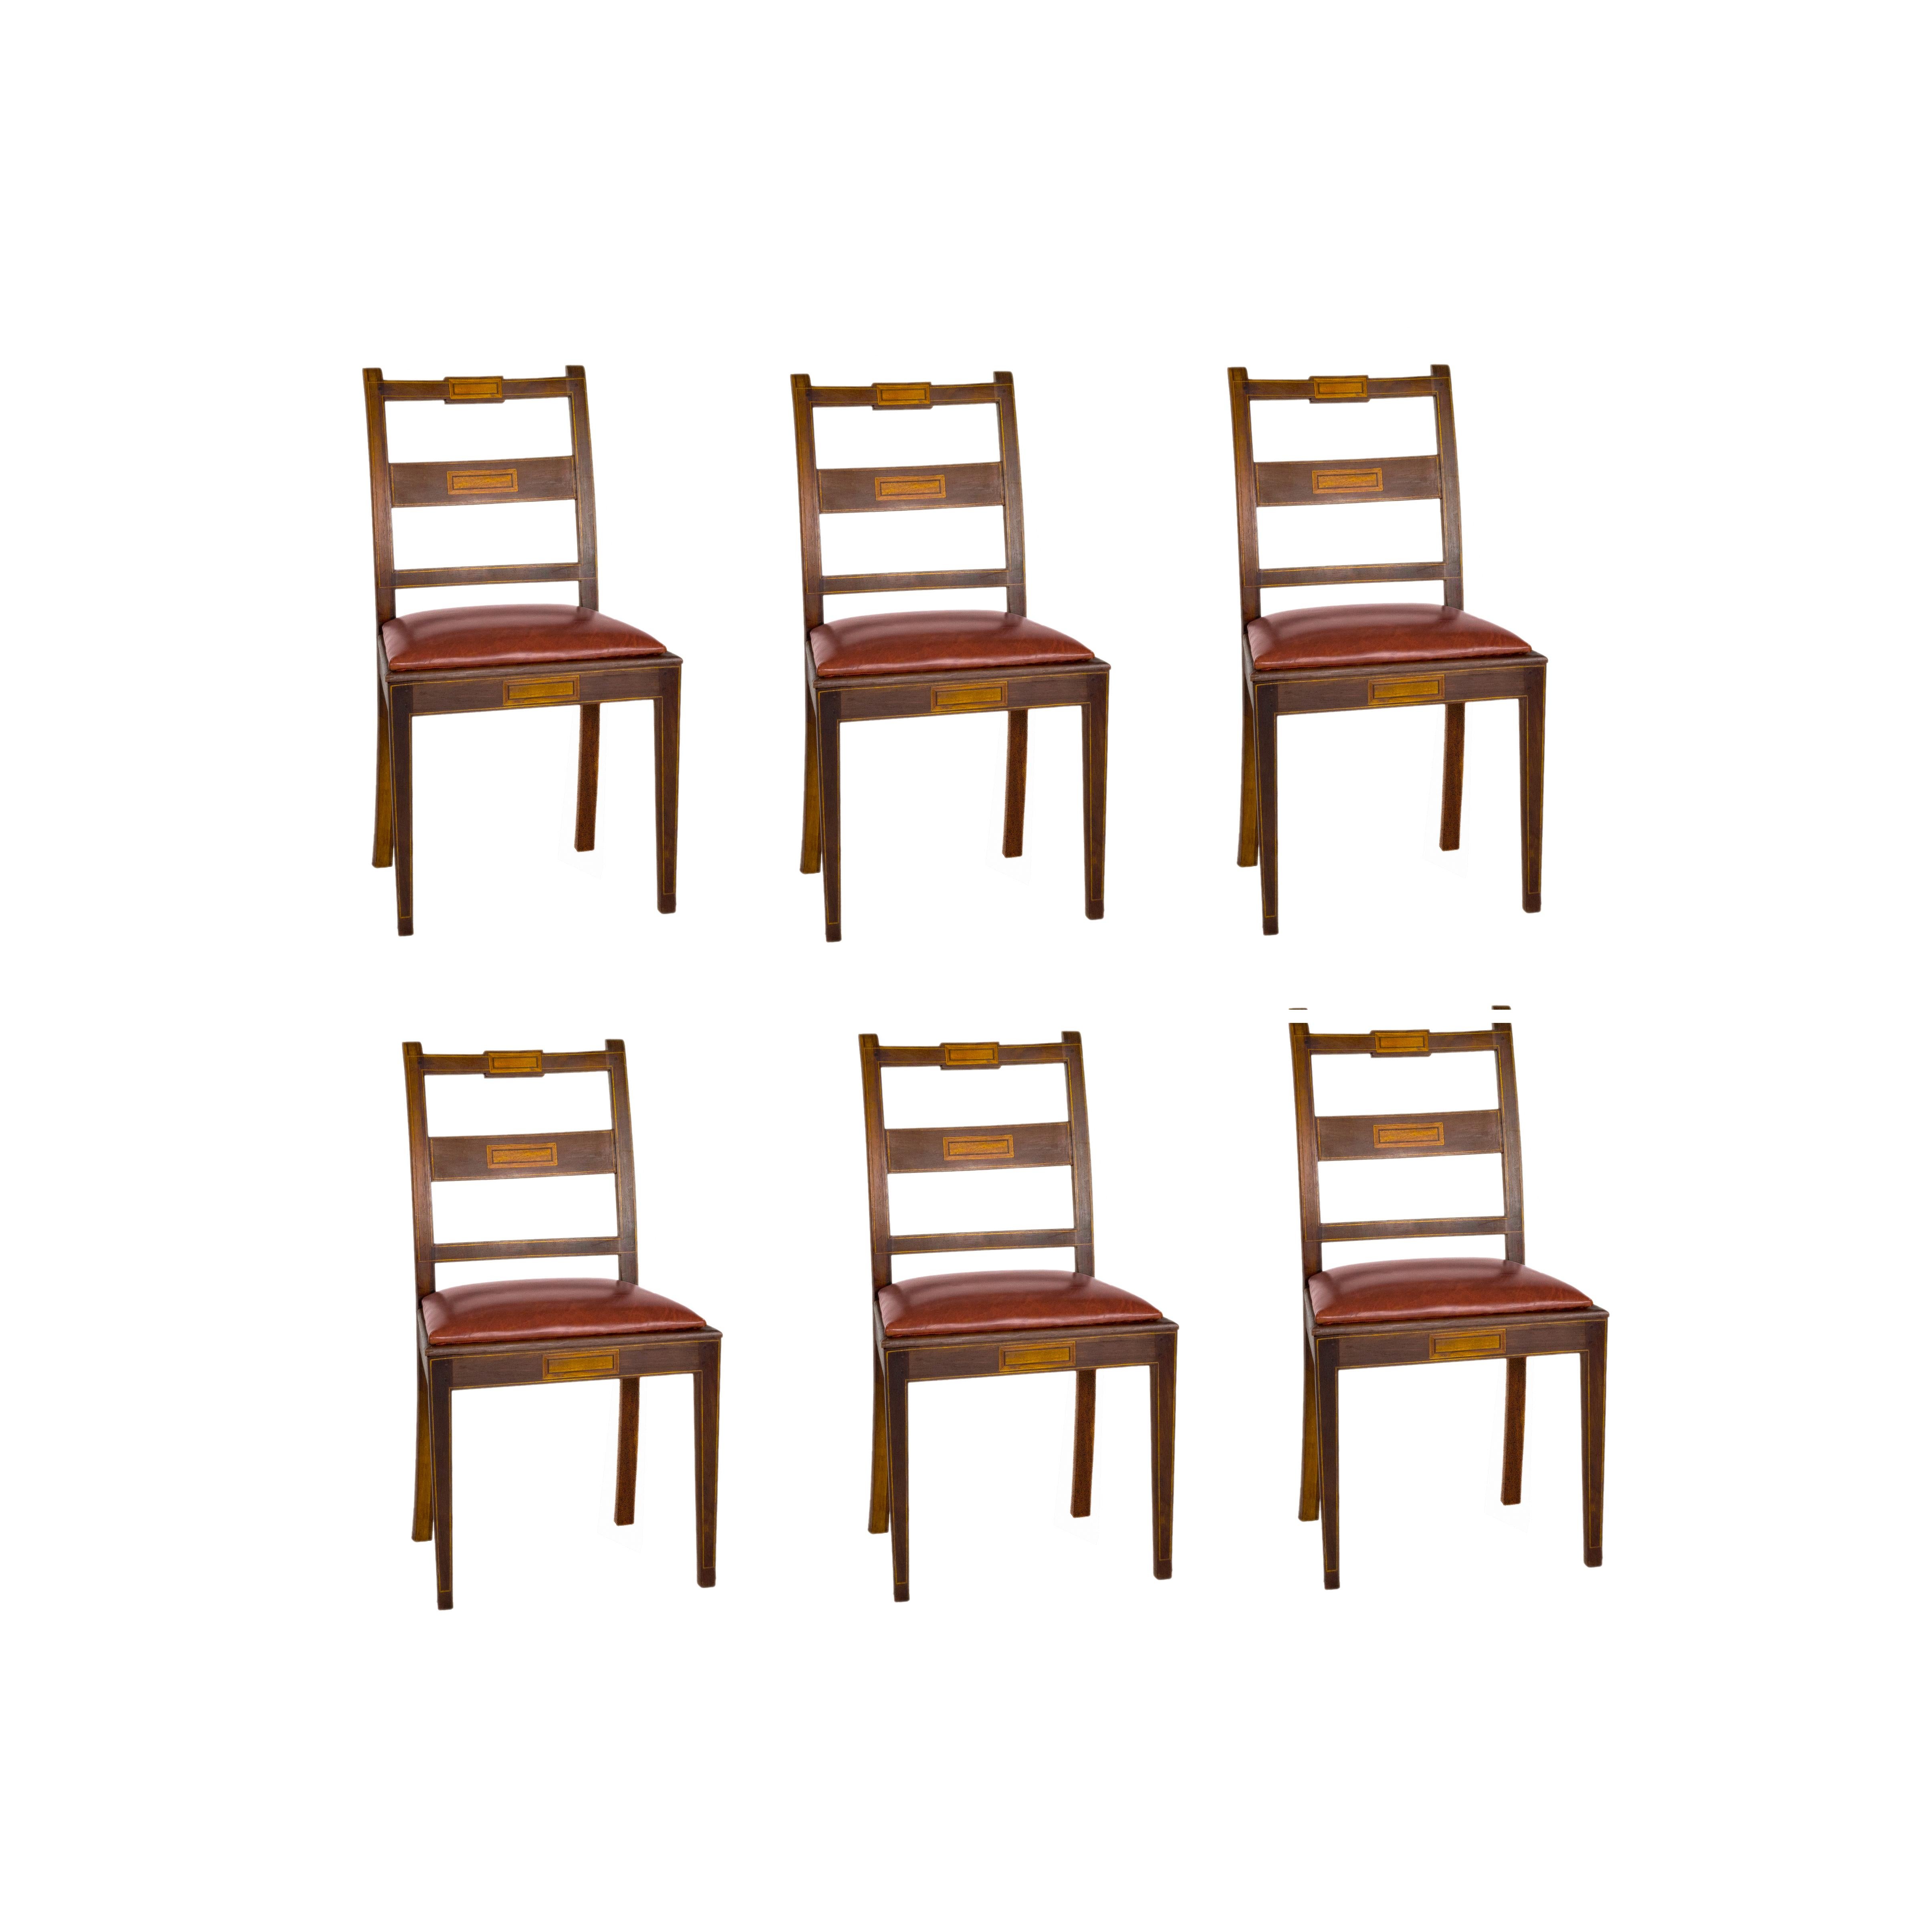 Inlay Set of Six Portuguese Chairs, Straw & Leather, 20th Century For Sale